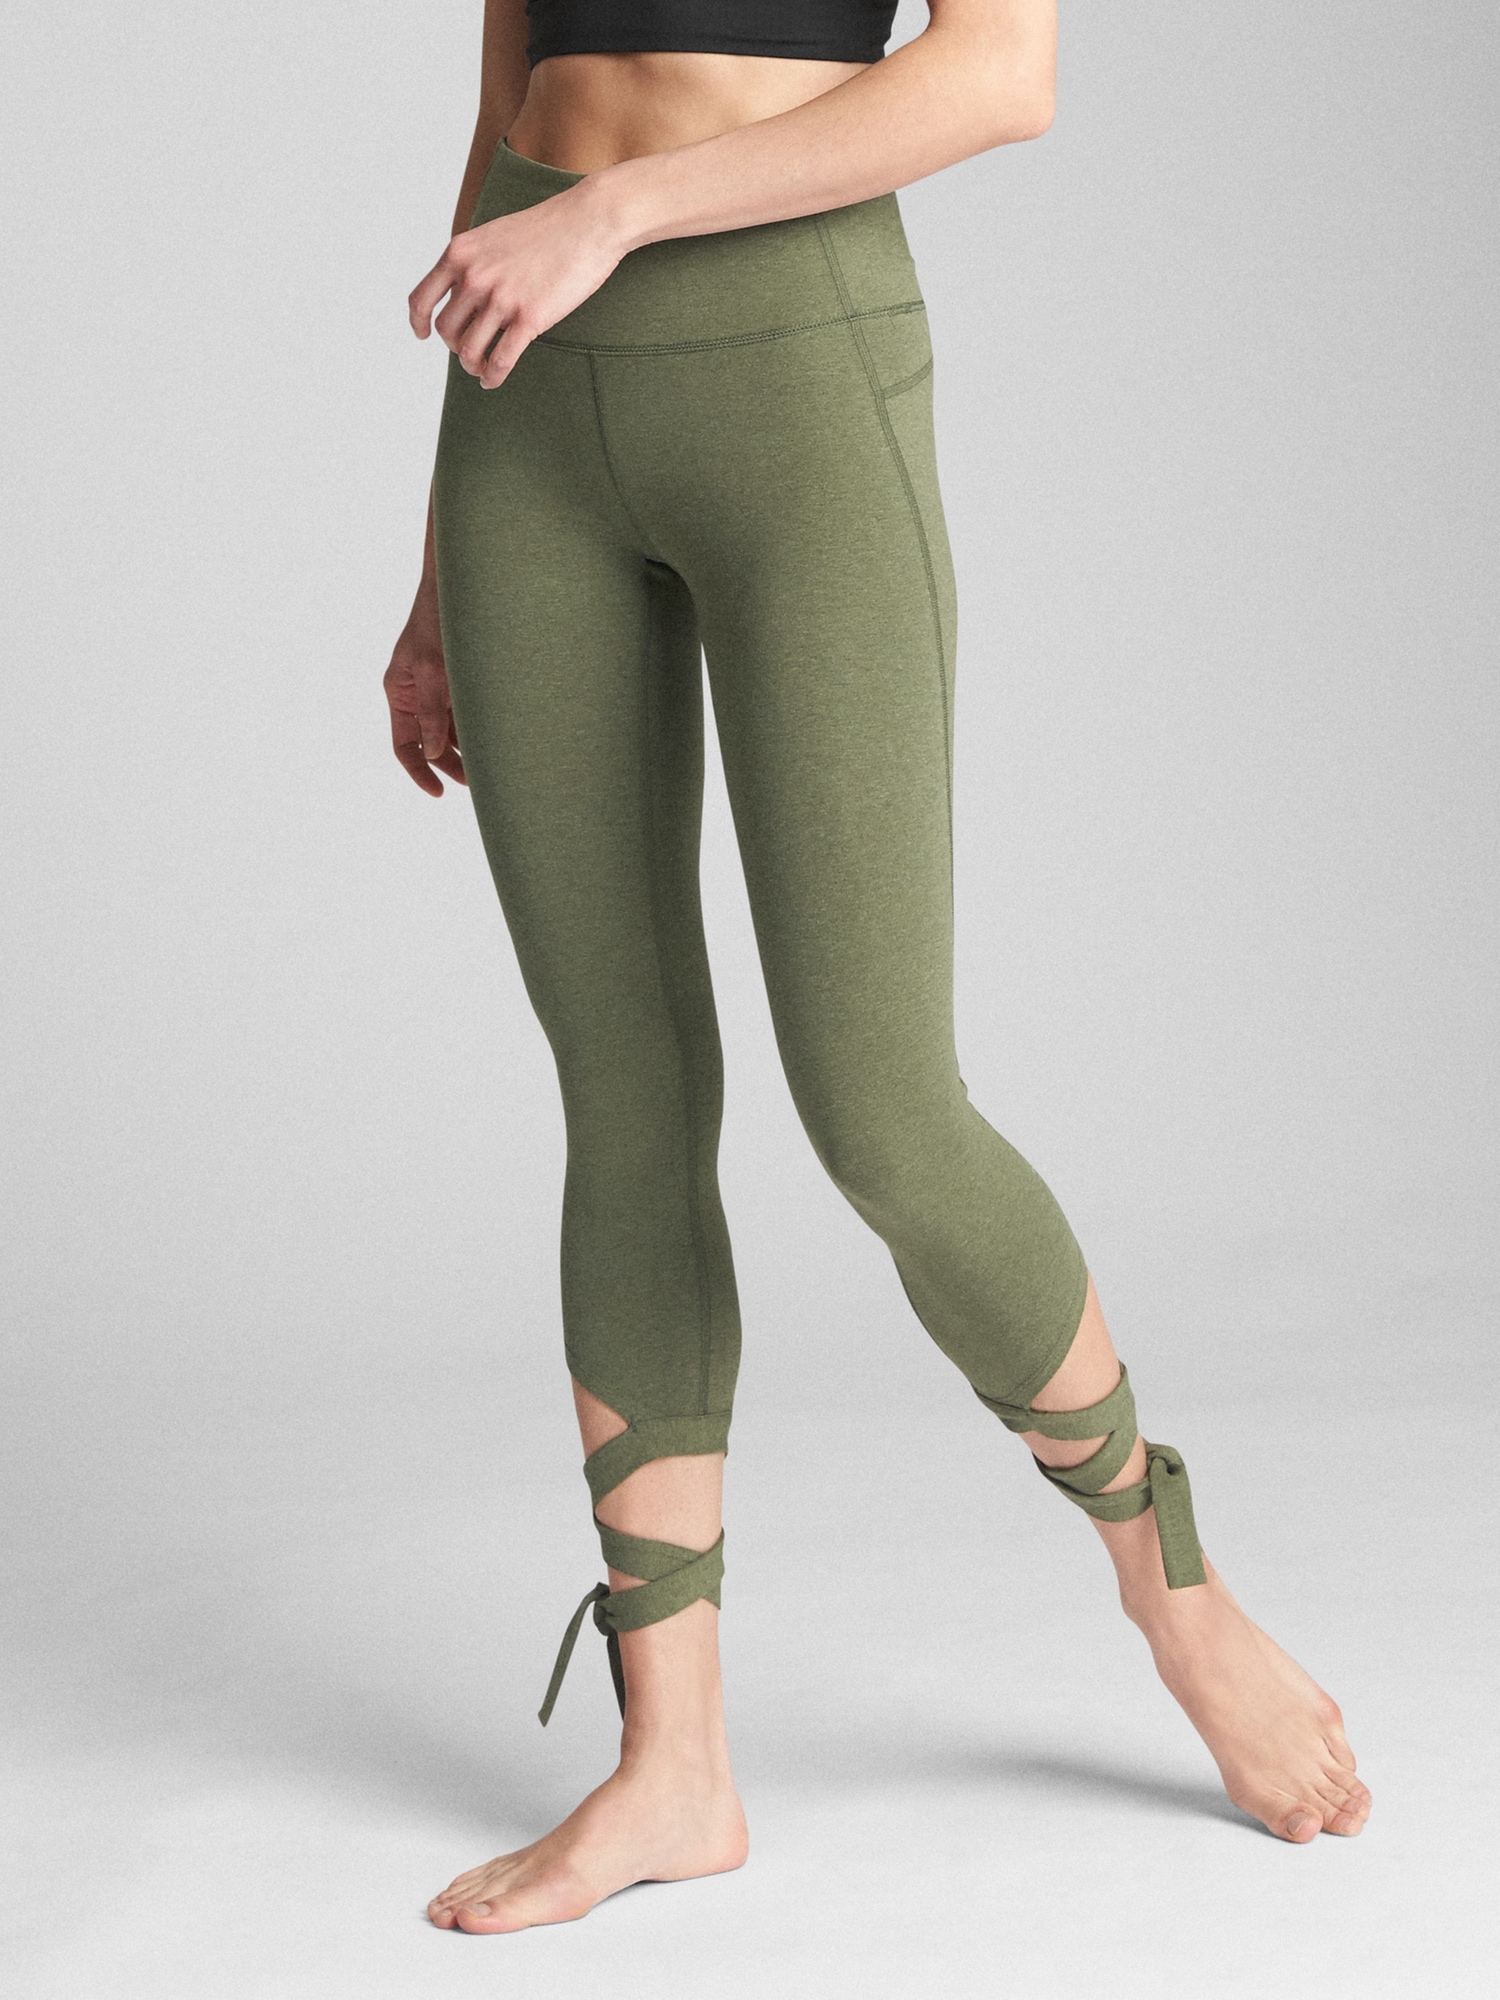  Stretch Is Comfort Girls Cotton Leggings Olive